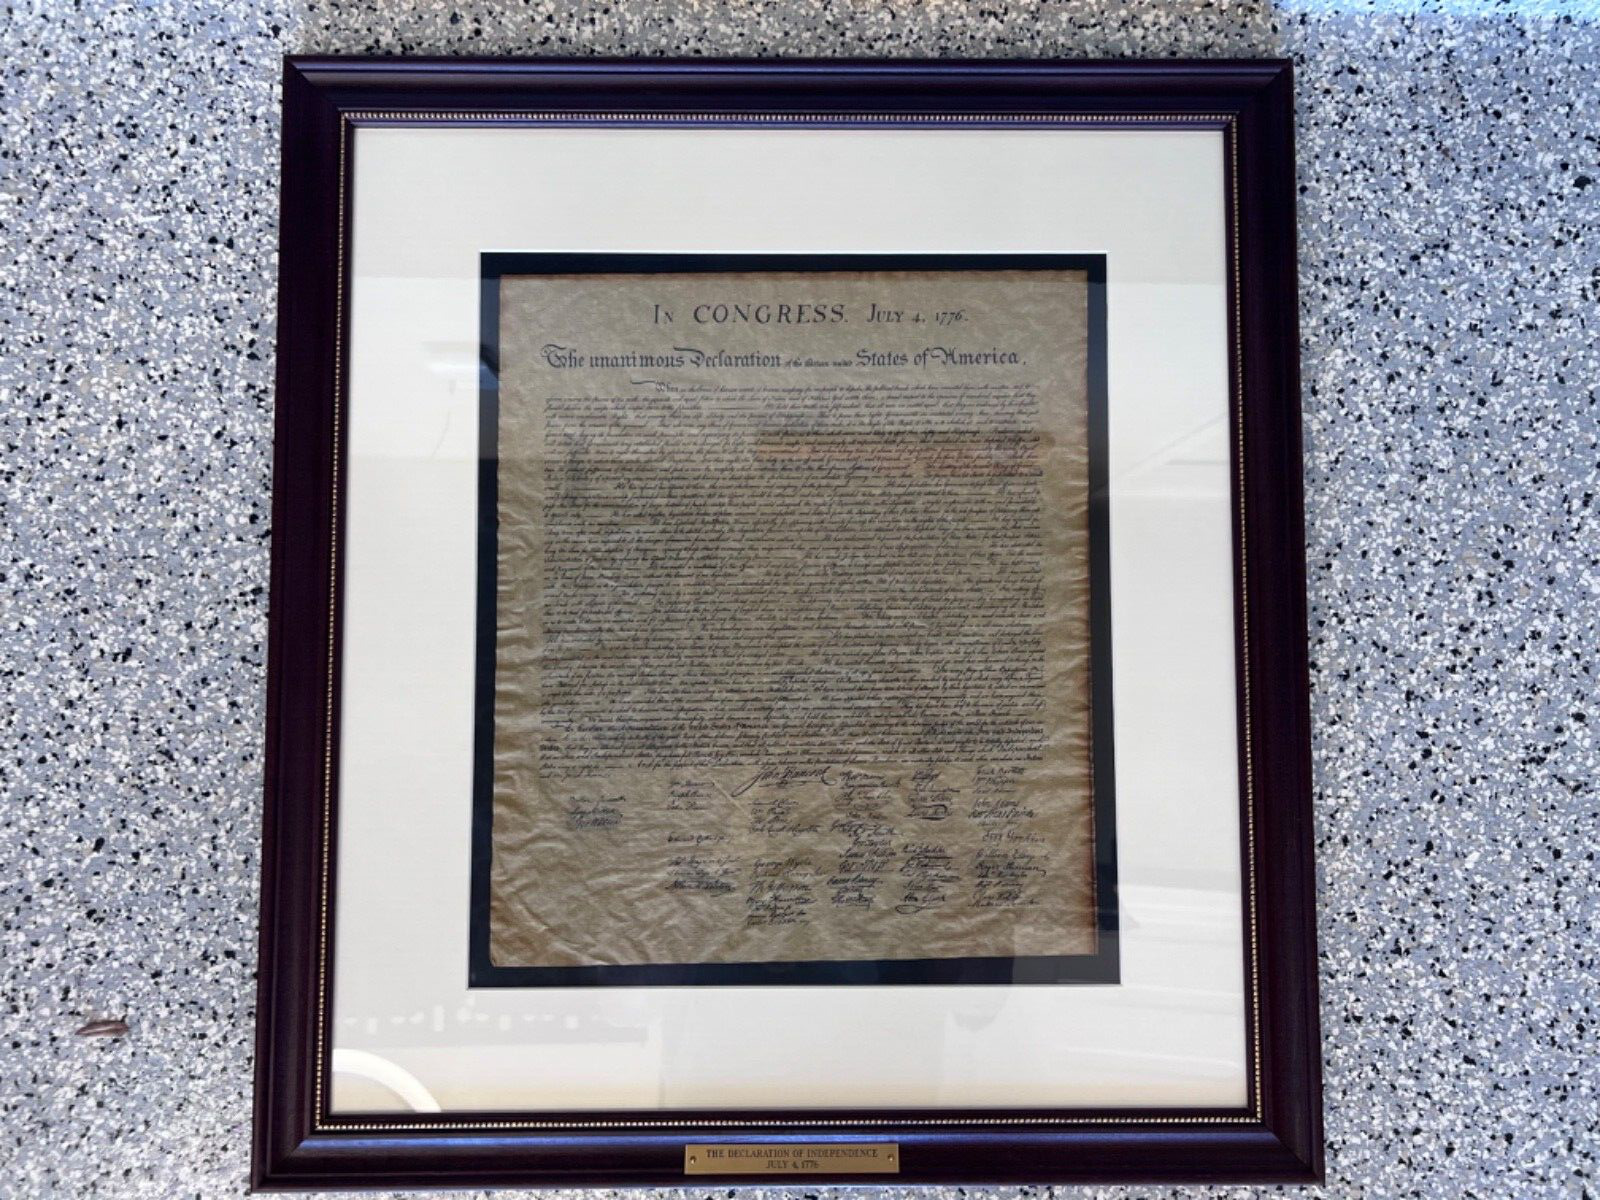 THE EASTON PRESS, FRAMED, MATTED COPY OF DECLARATION OF INDEPENDENCE